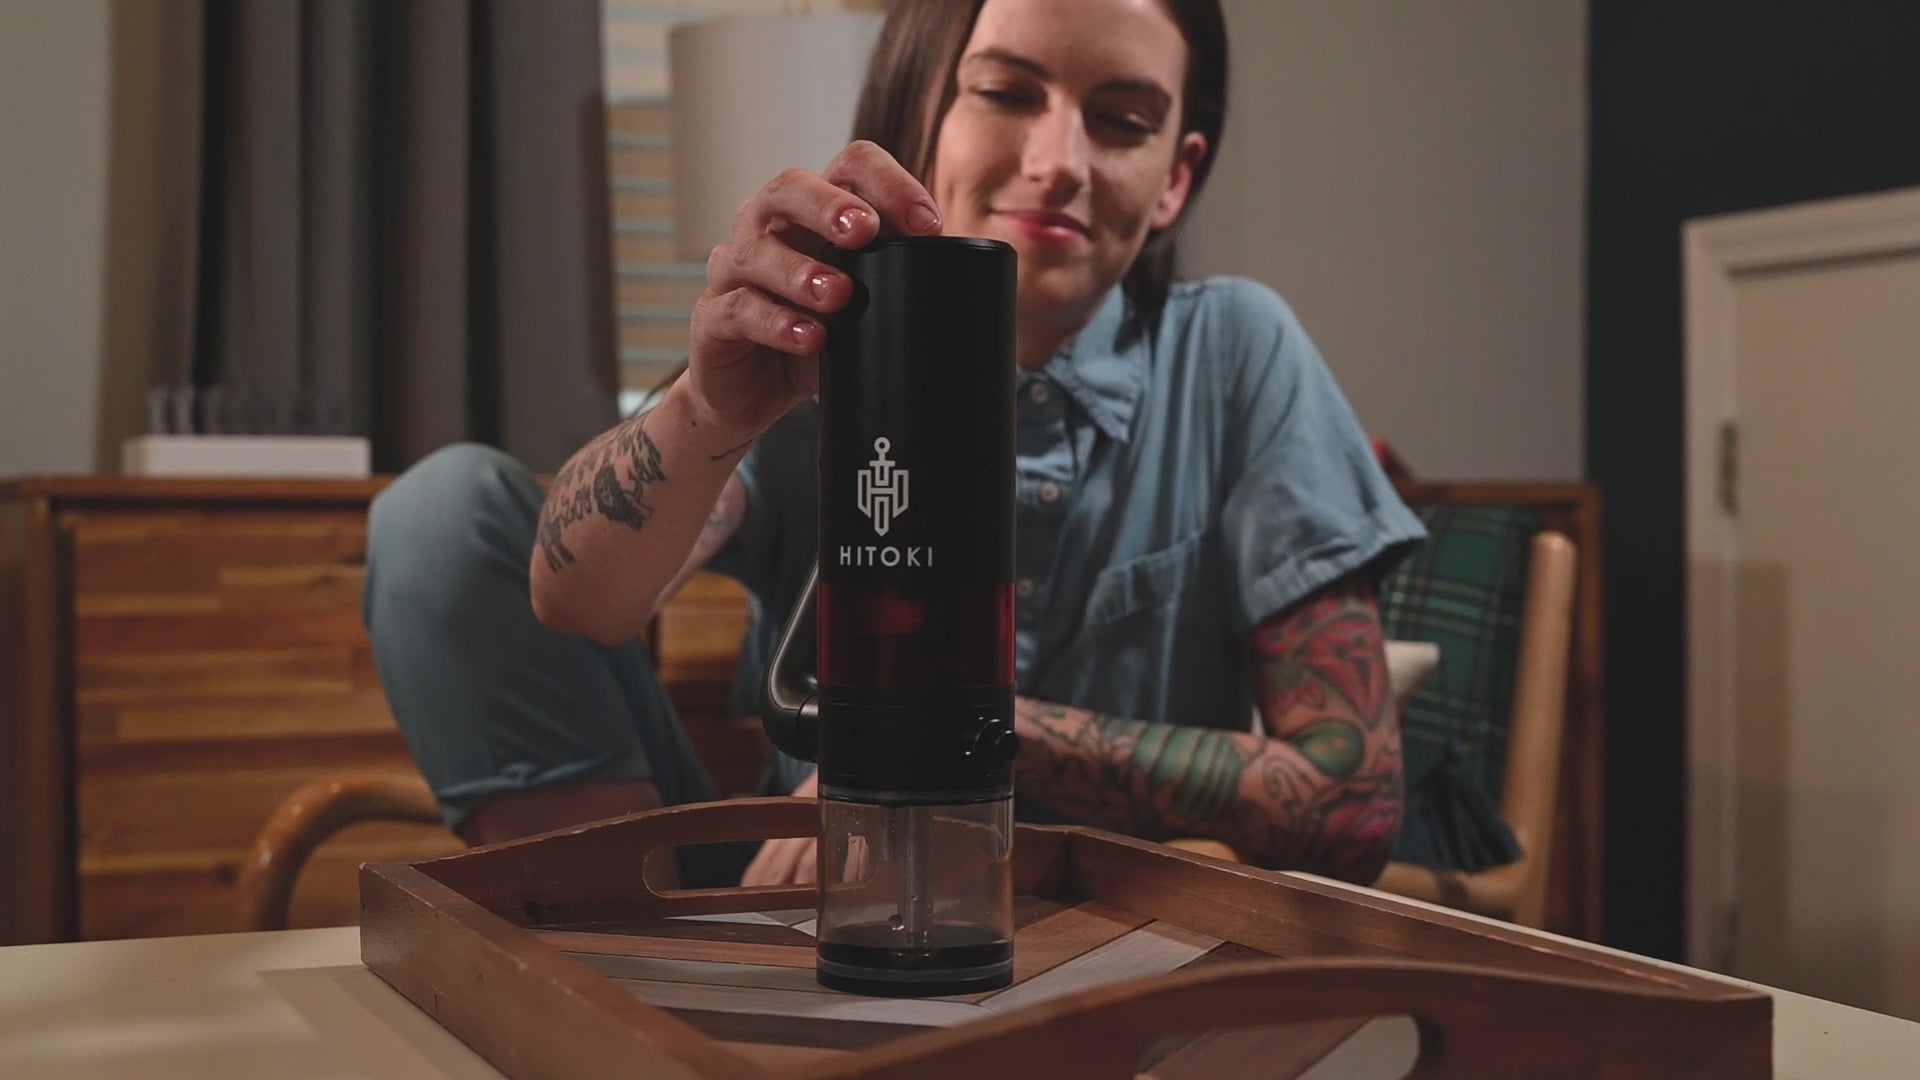 Load video: Hitoki Trident Laser Bong - Experience the Future of Smoking with Laser Technology